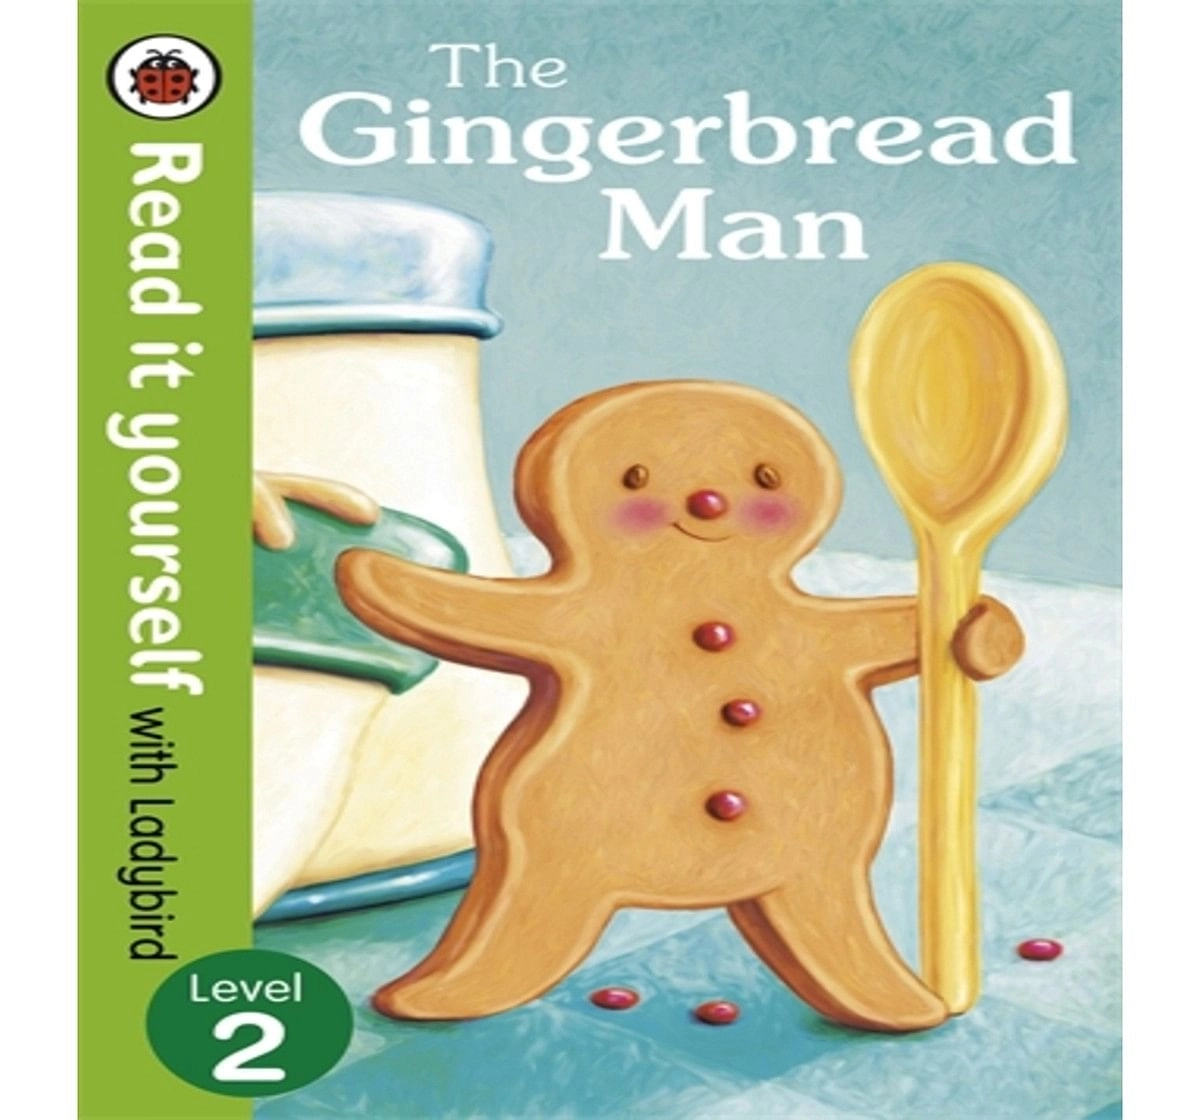 The Gingerbread Man : RIY (HB) Level 2, 32 Pages Book by Ladybird, Hardback